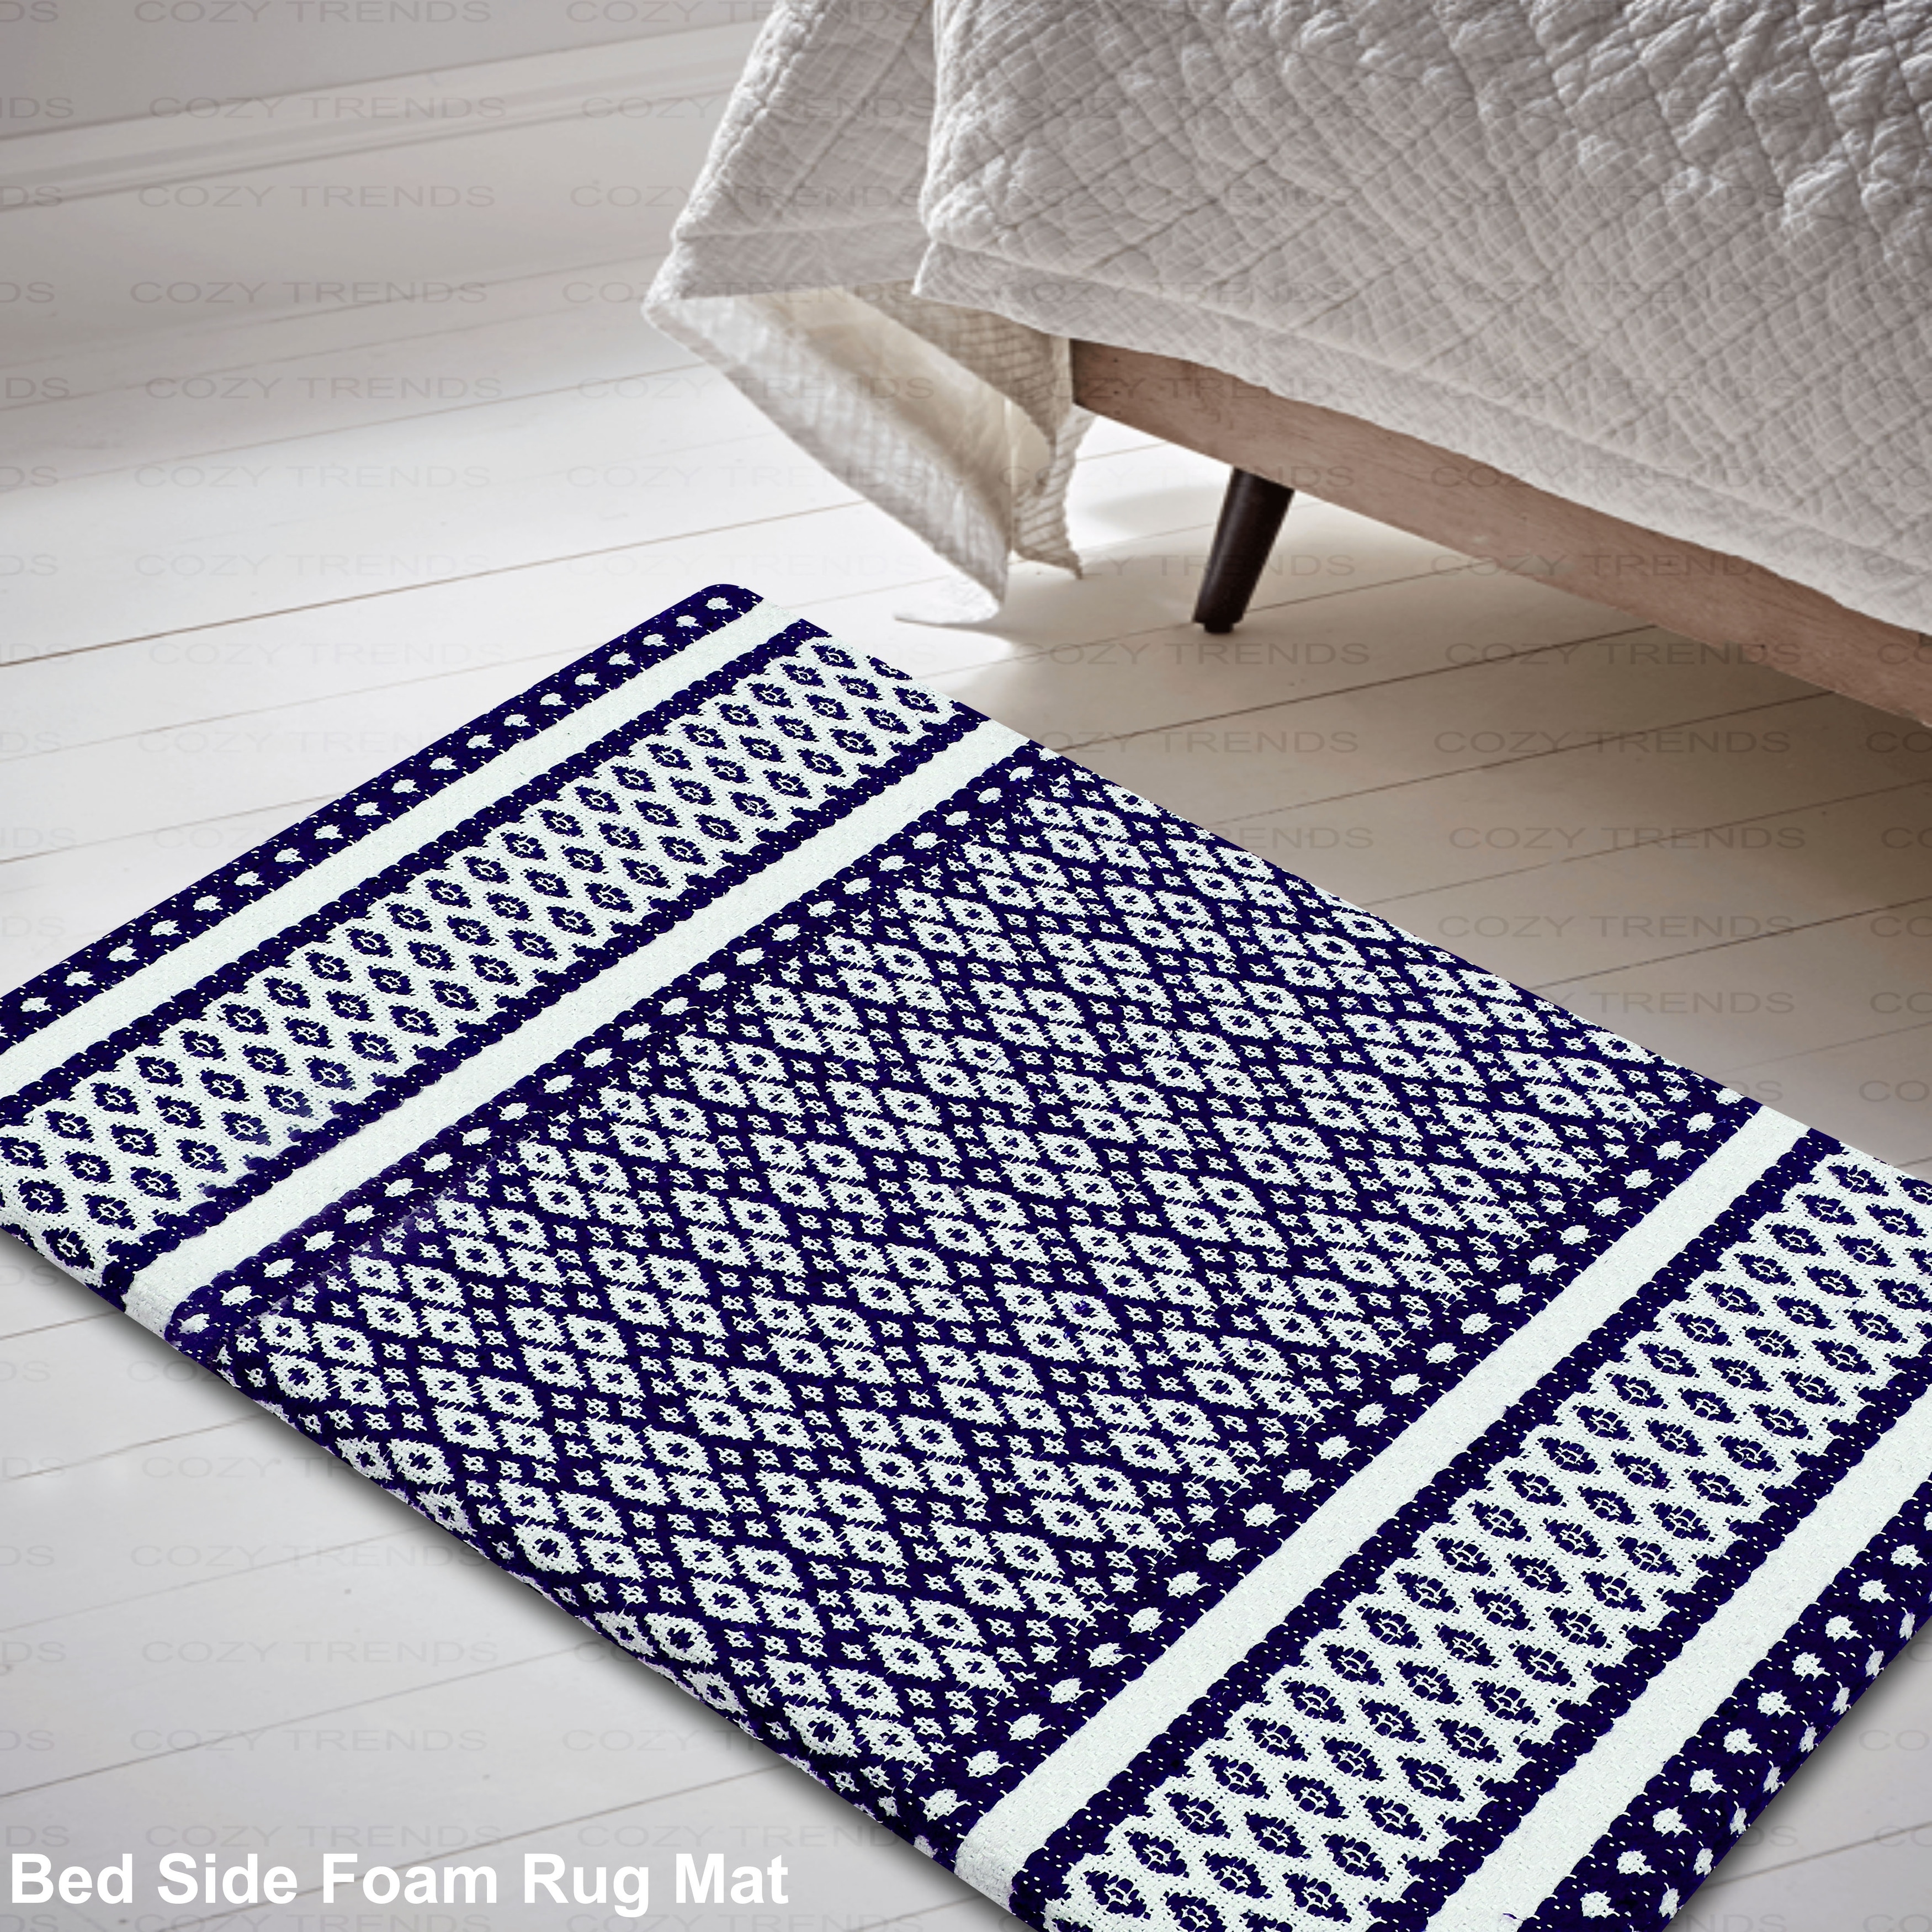 https://ak1.ostkcdn.com/images/products/is/images/direct/65d5982bef673adbf7c5af348803b24198b806fa/Cotton-Kitchen-Mat-Cushioned-Anti-Fatigue-Rug%2C-Non-Slip-Mats-Comfort-Foam-Rug-for-Kitchen%2C-Office%2C-Sink%2C-Laundry---18%27%27x30%27%27.jpg